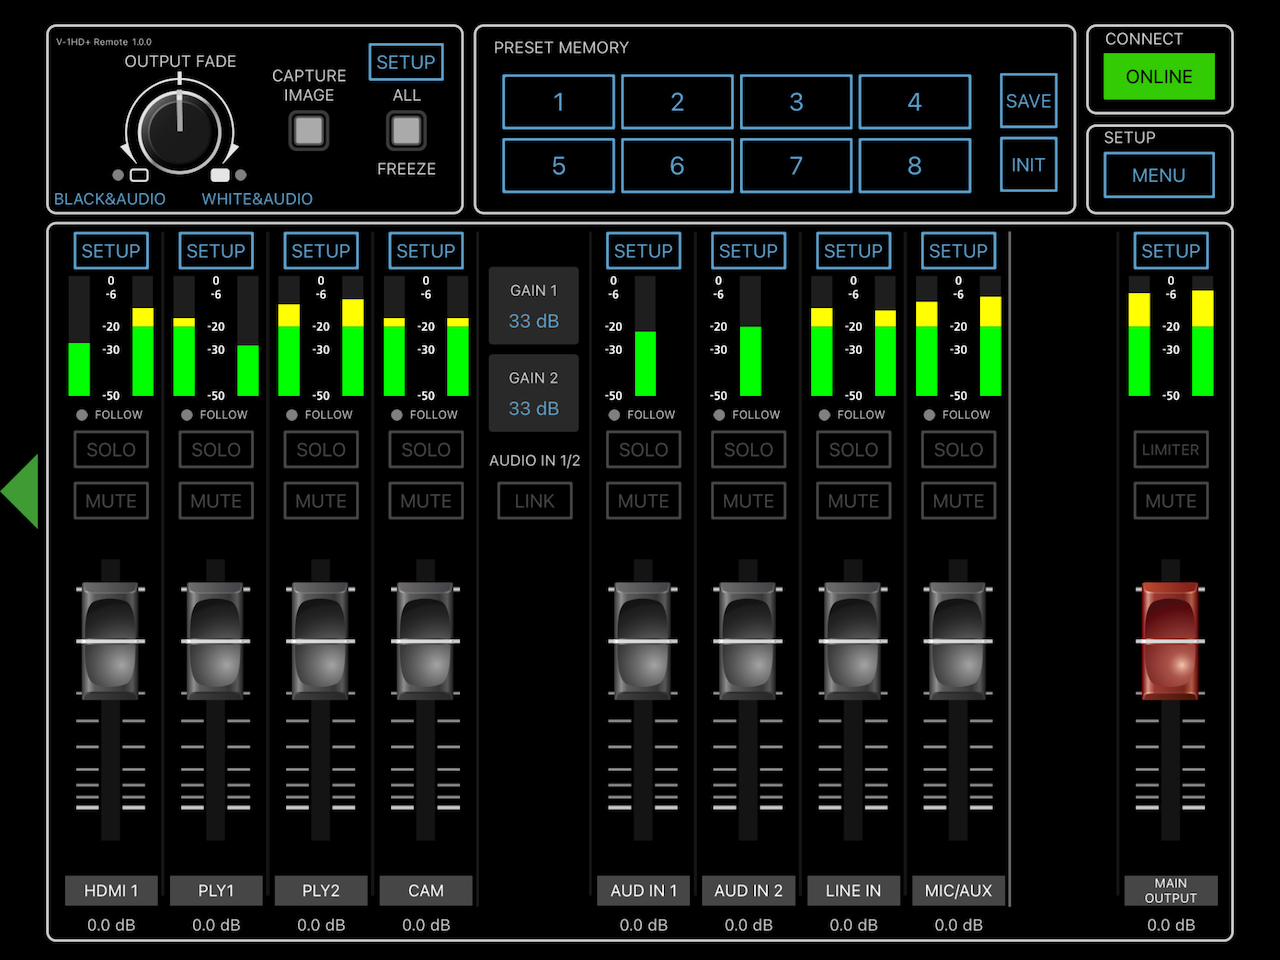 It is now possible to remote the Roland V-1HD⁺ mixer from an